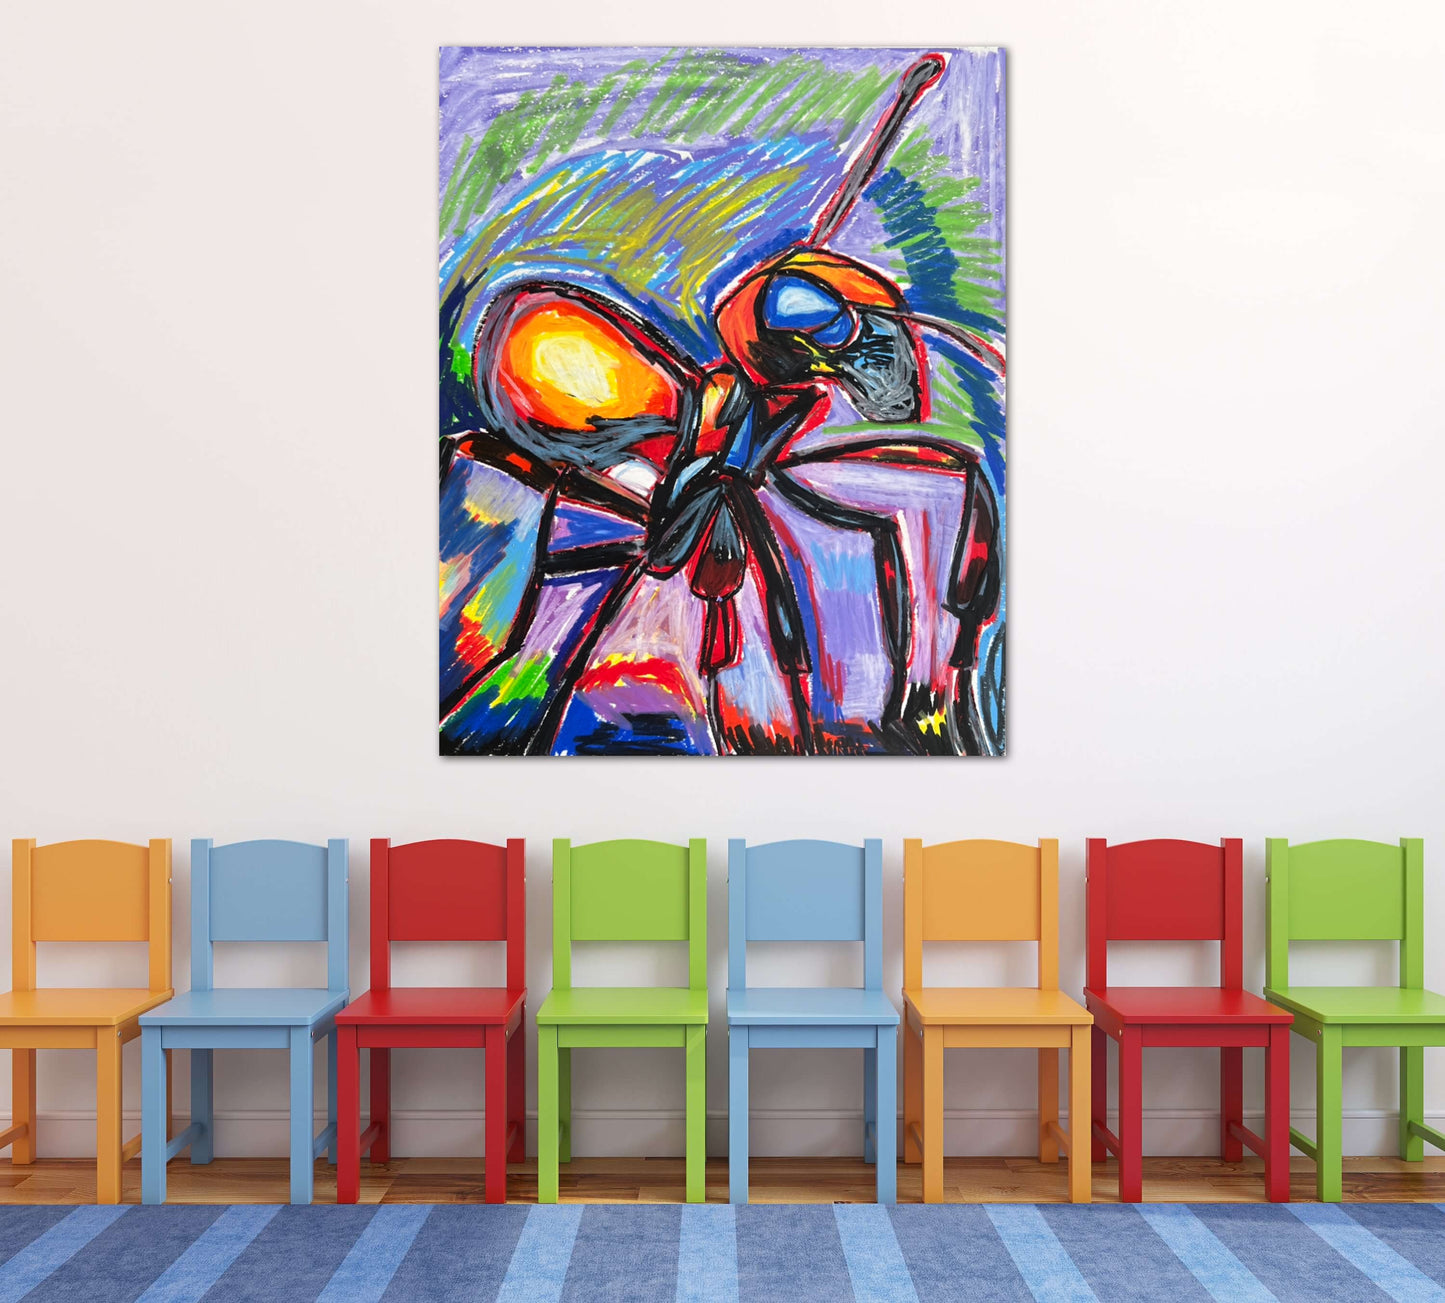 Ant - Print, Poster, Stretched Canvas Print